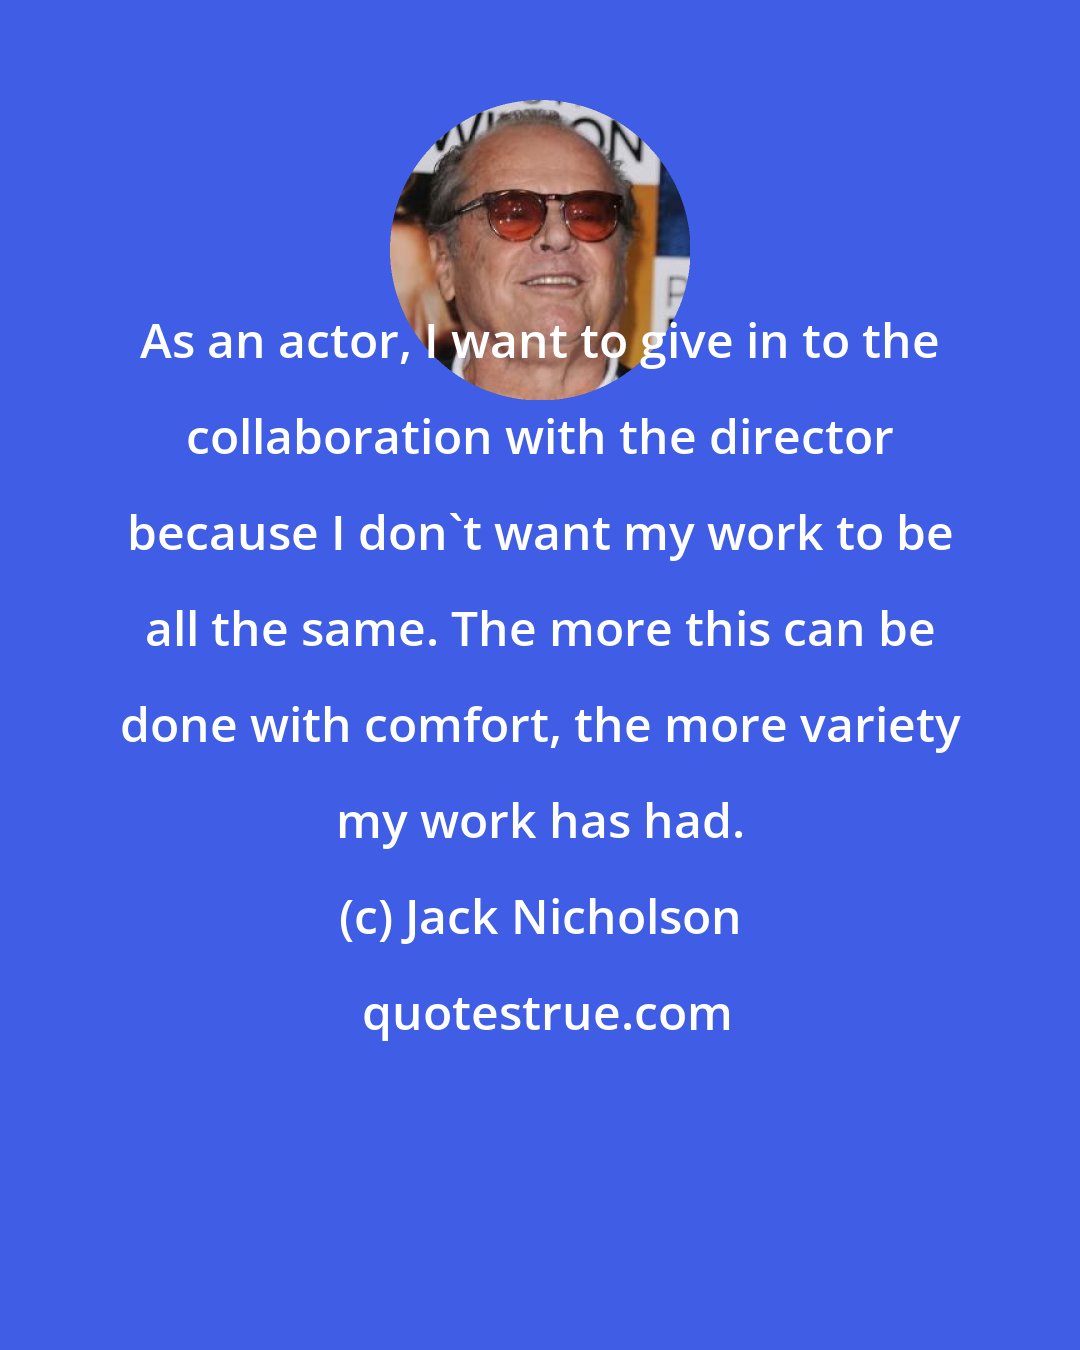 Jack Nicholson: As an actor, I want to give in to the collaboration with the director because I don't want my work to be all the same. The more this can be done with comfort, the more variety my work has had.